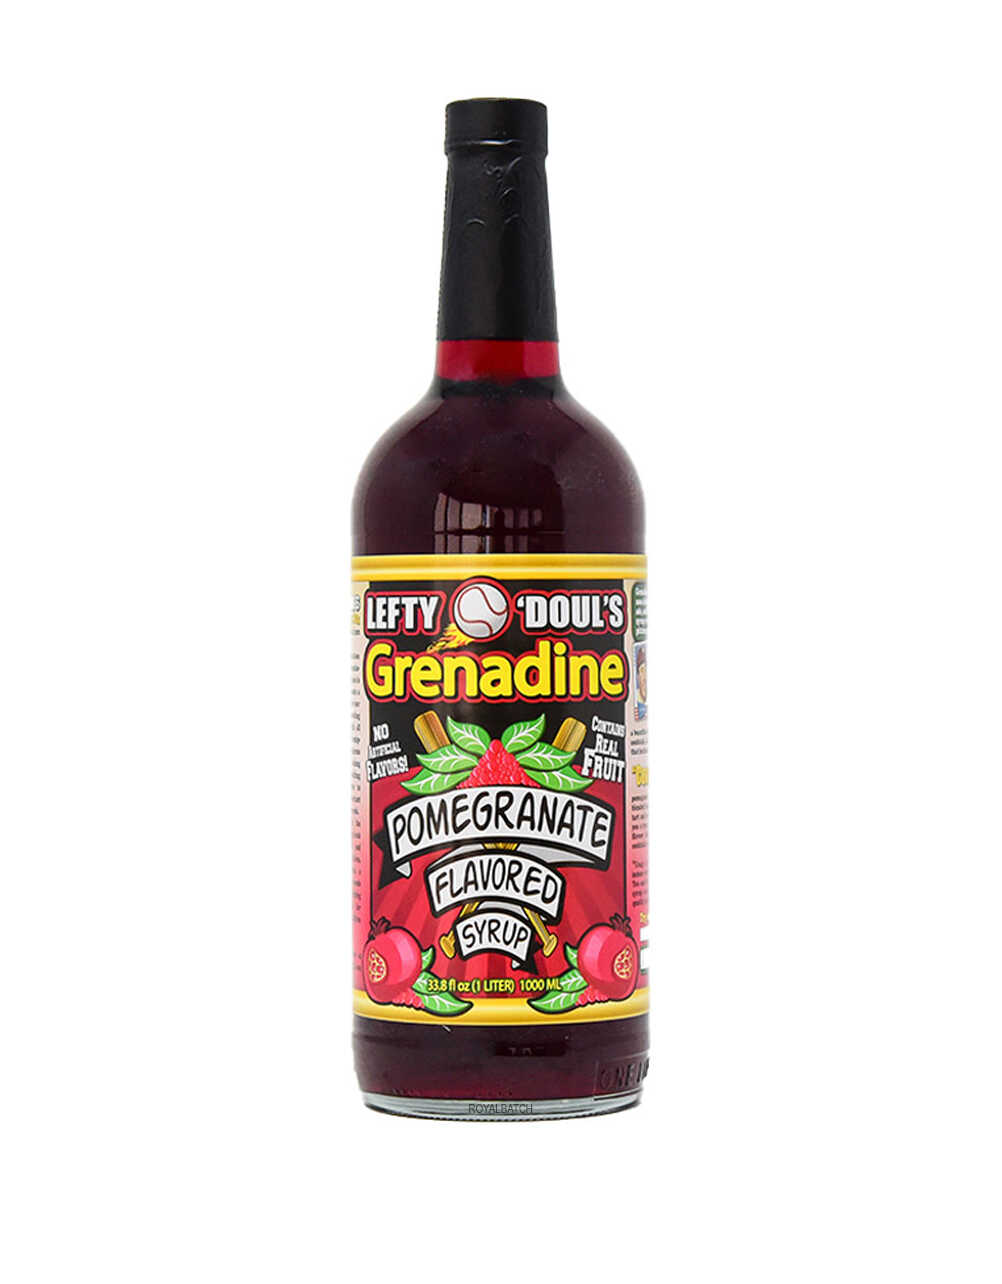 Lefty O’Doul’s Grenadine Pomegranate Flavored Syrup Cocktail Mixes 1L